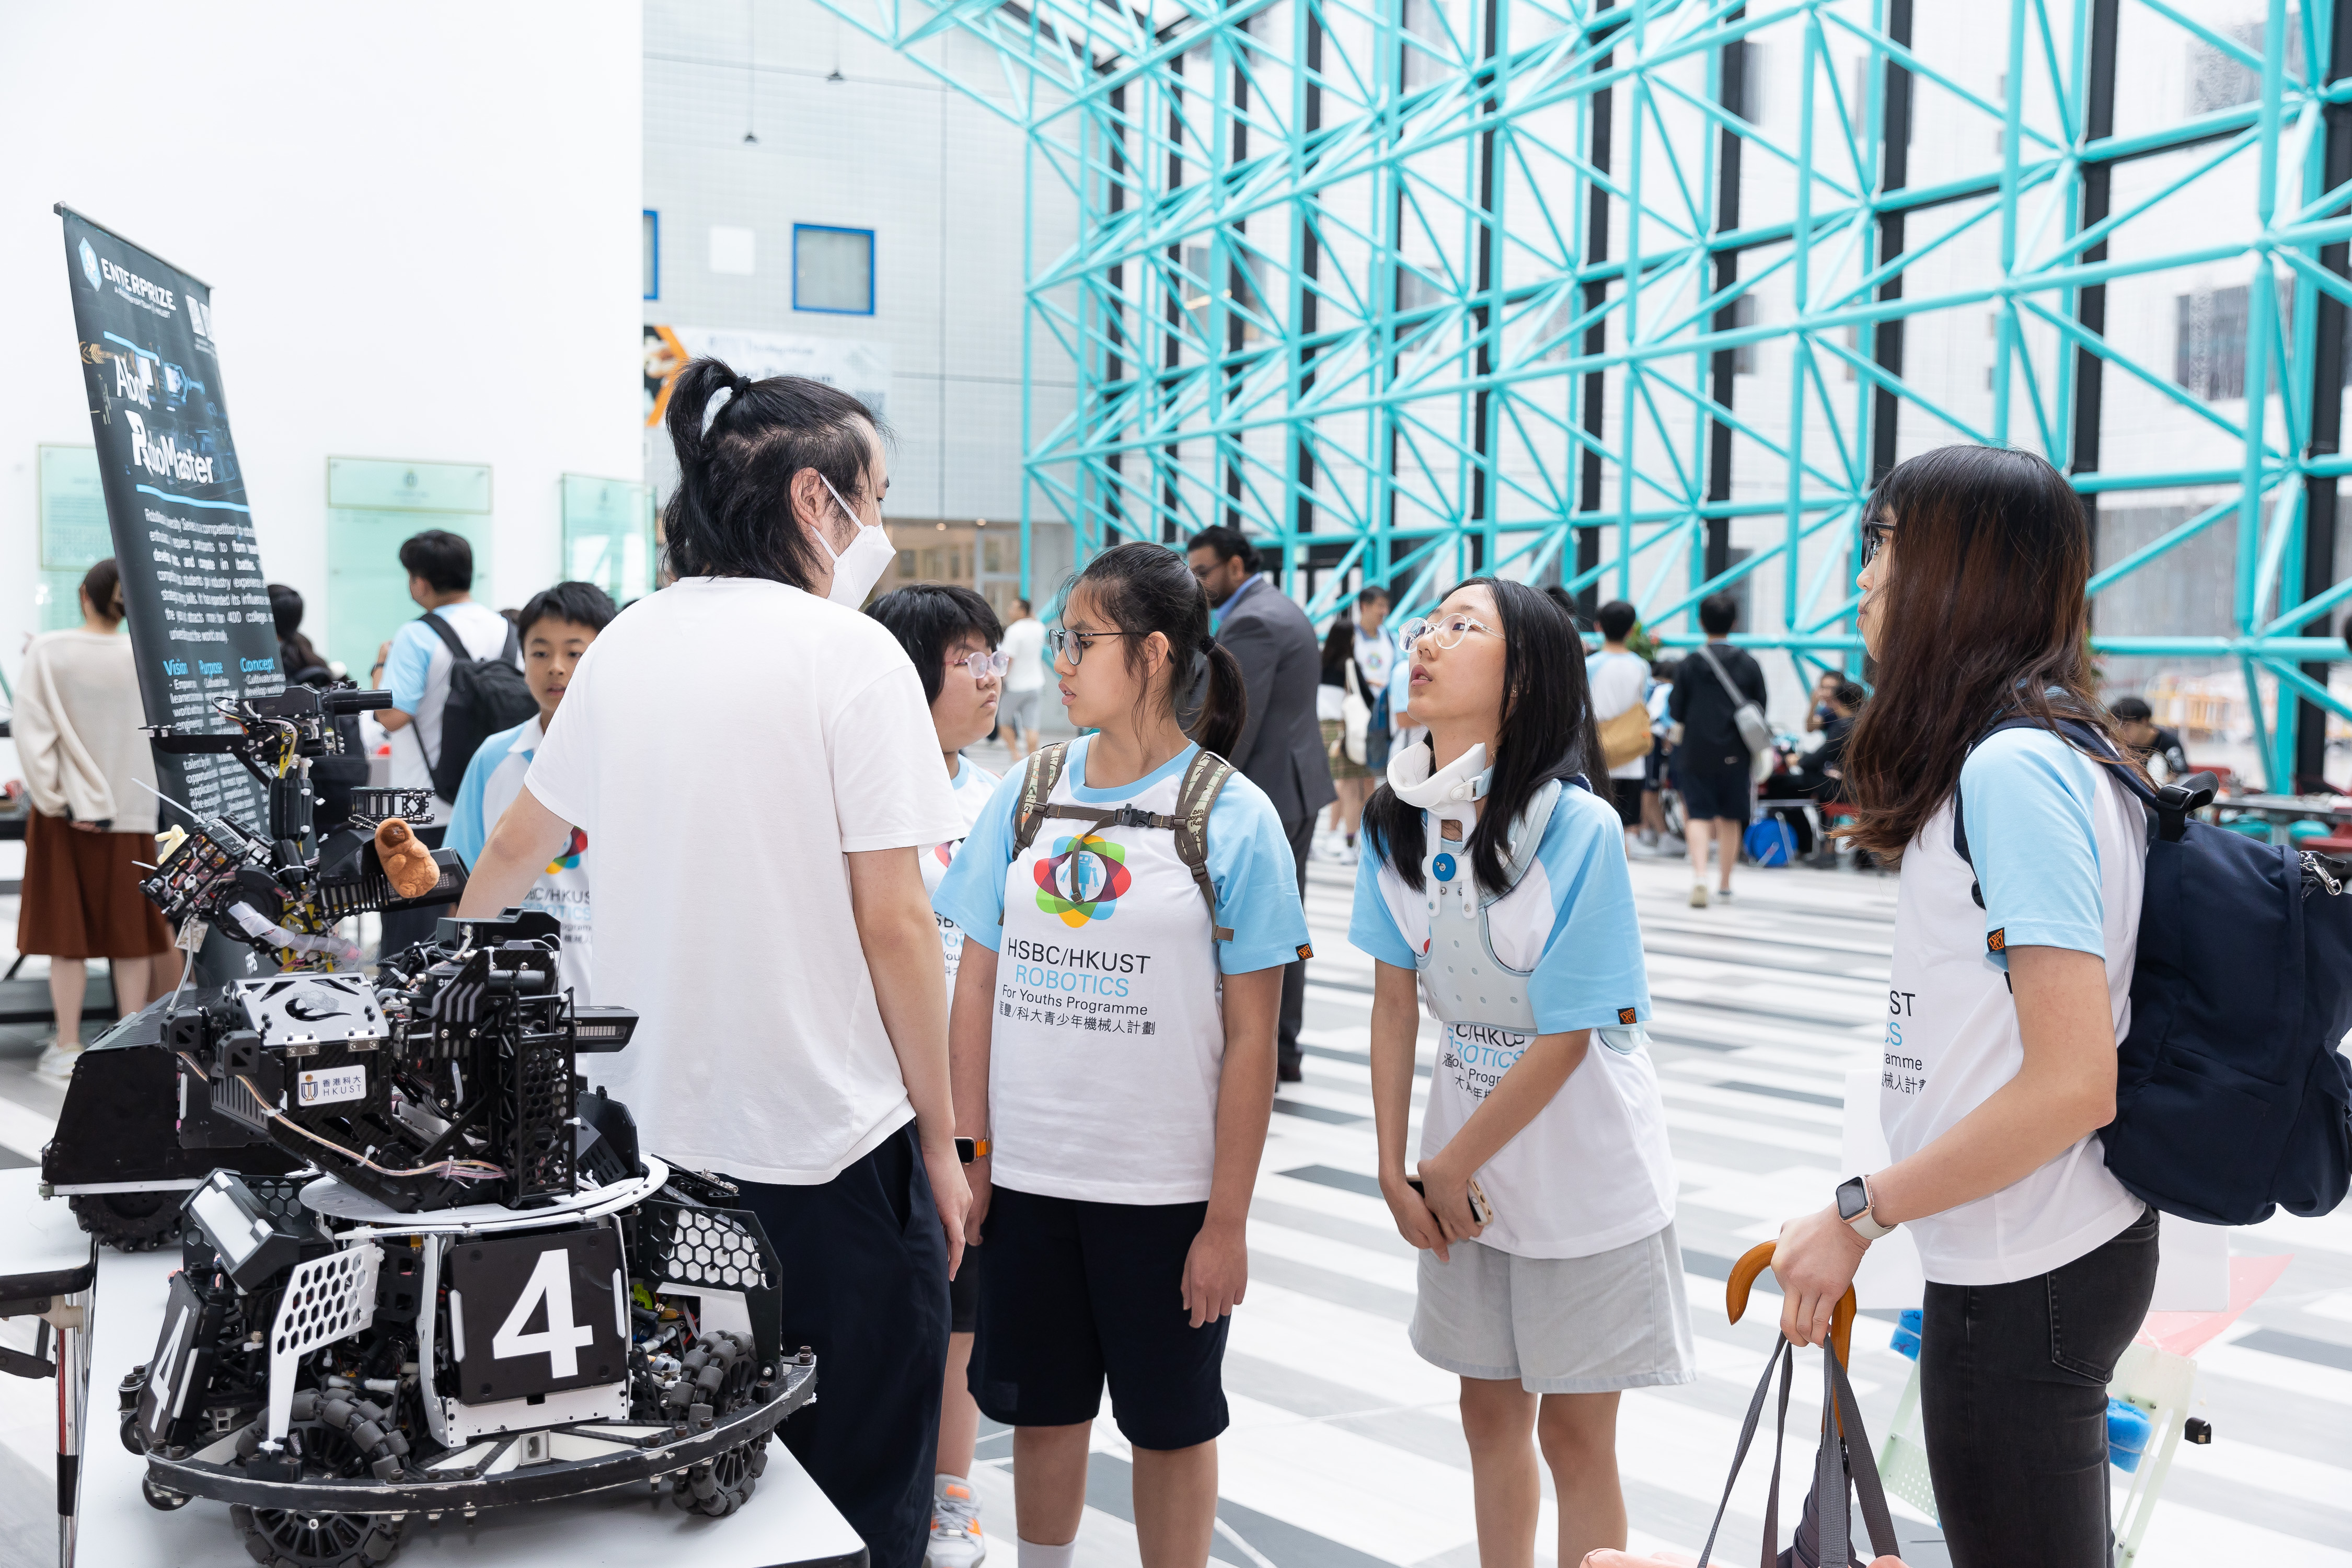 A student from one of the competition teams at HKUST introduced the team’s robots to the participants.